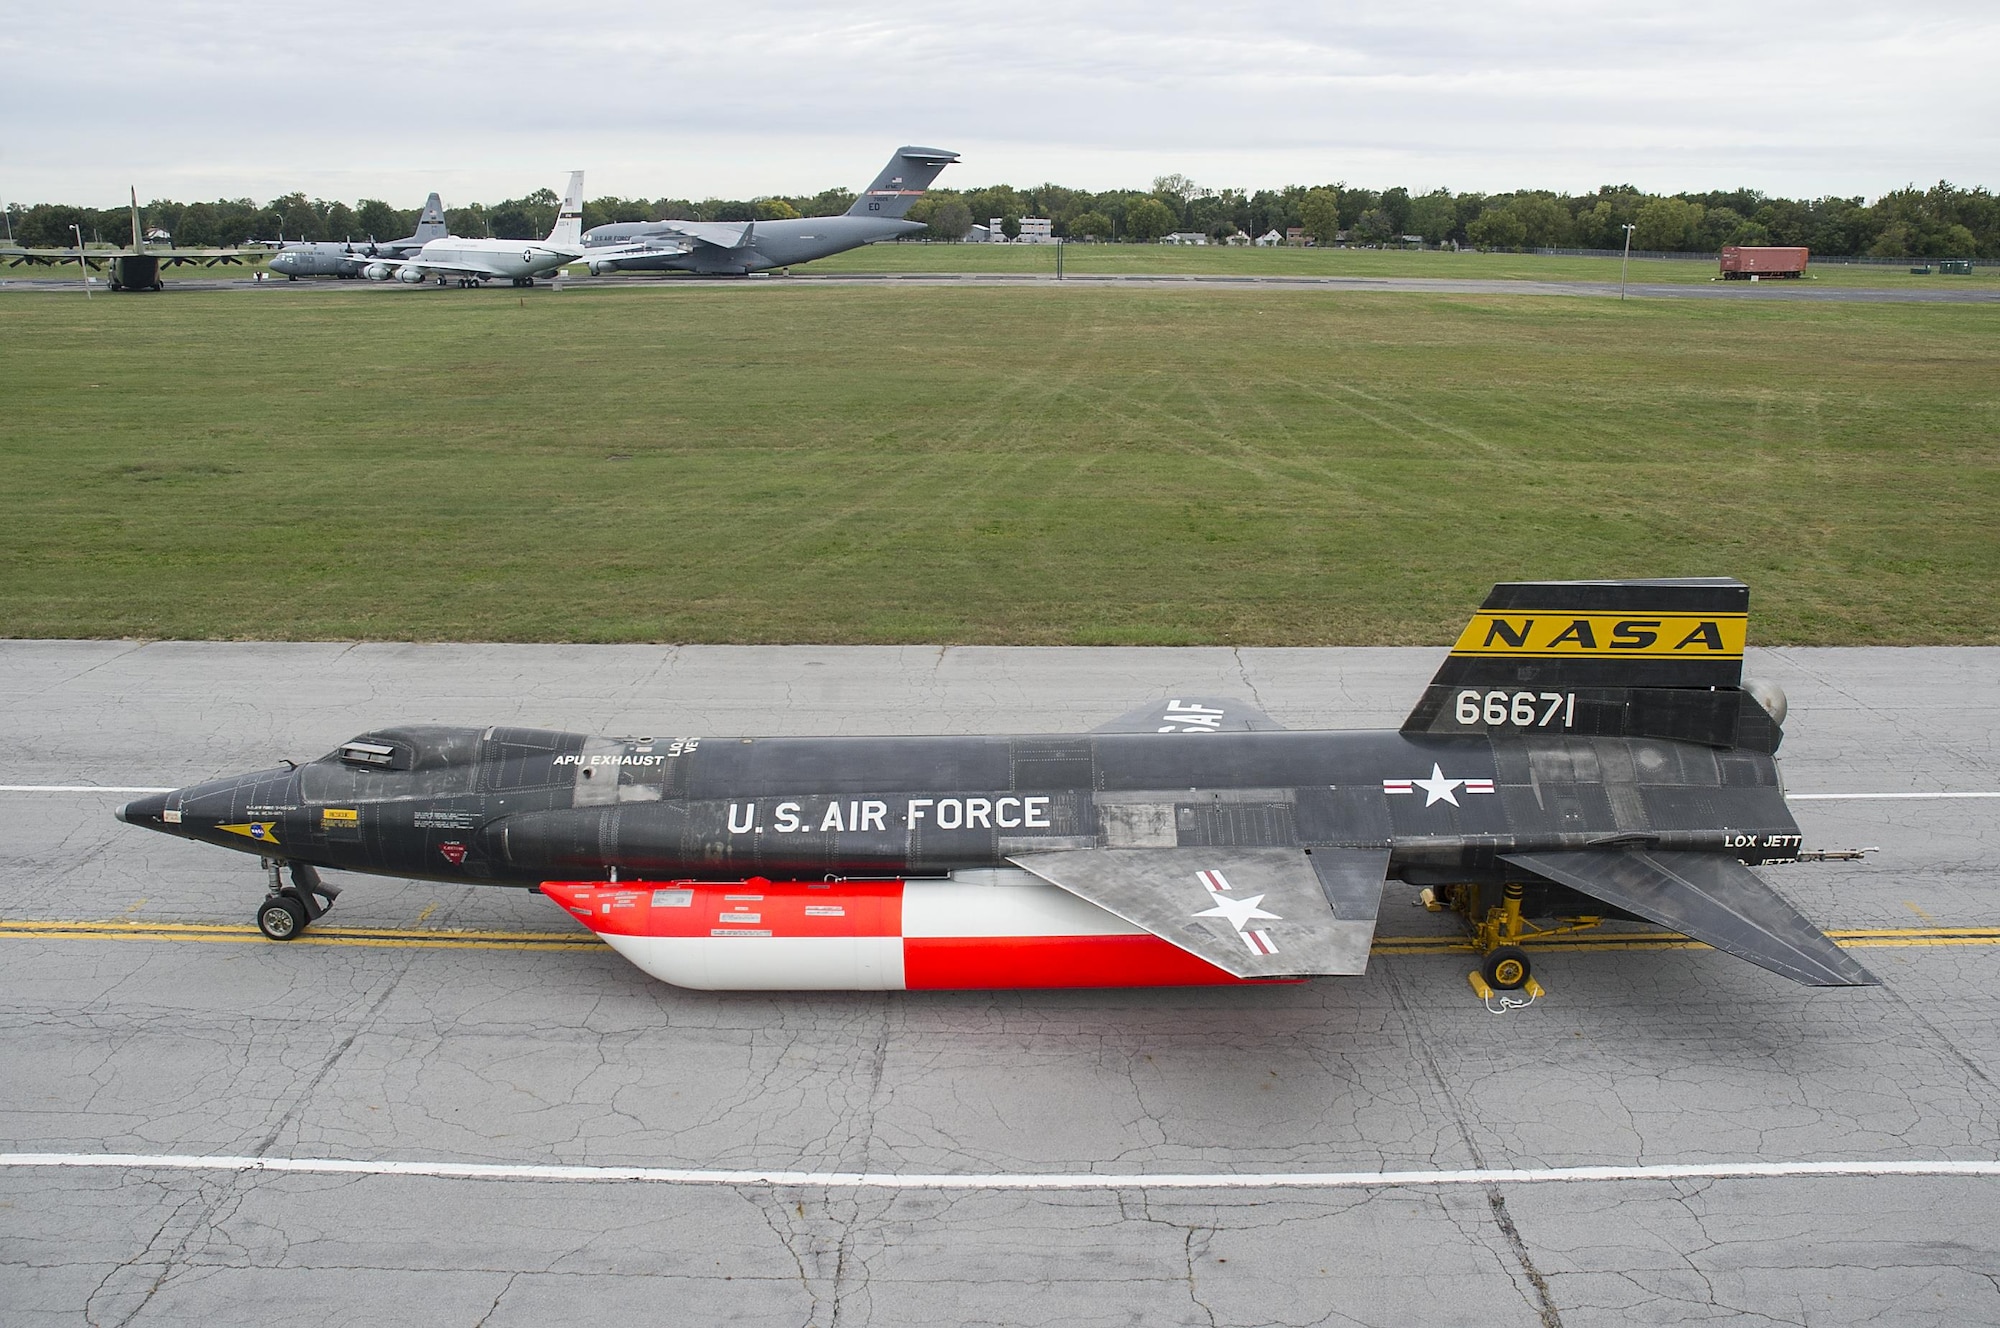 The North American X-15A-2 was moved from the restoration hangar to the museum’s new fourth building on Oct. 2, 2015. The X-15 became the first aircraft to be moved into the fourth building, where it will be part of the expanded Space Gallery. (U.S. Air Force photo by Ken LaRock)